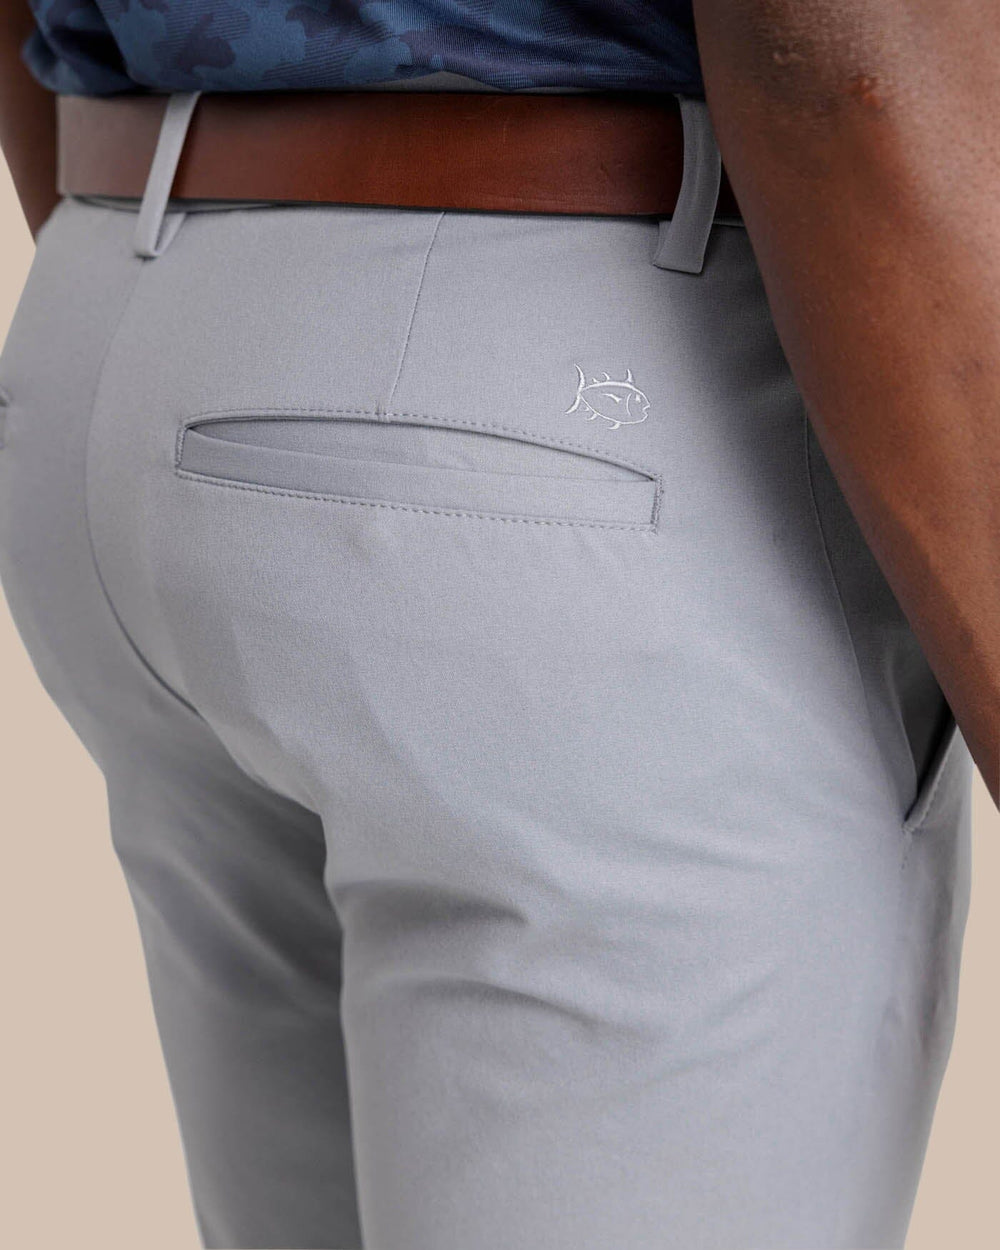 The detail view of the Southern Tide Jack Performance Pant by Southern Tide - Steel Grey